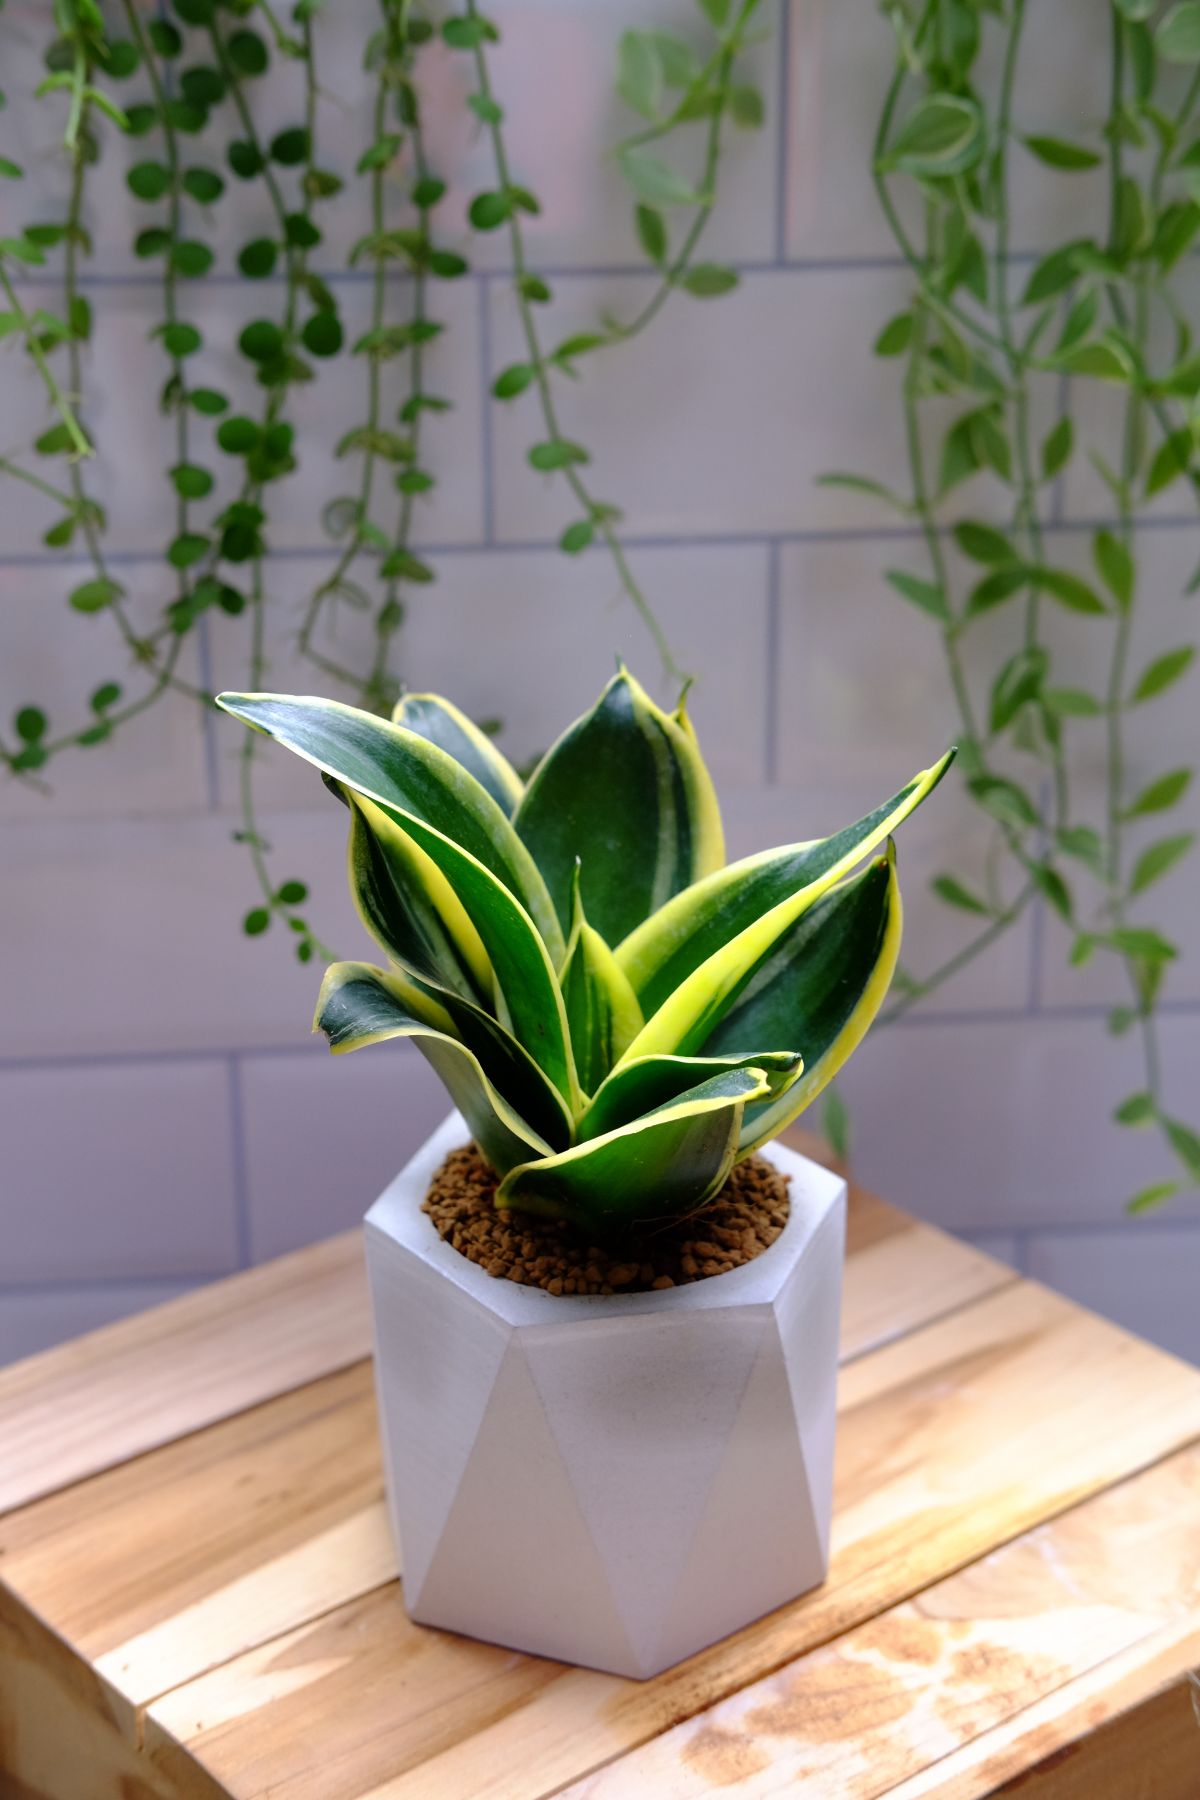 Sansevieria hahnii jade grows in a modern-looking pot on a wooden table.